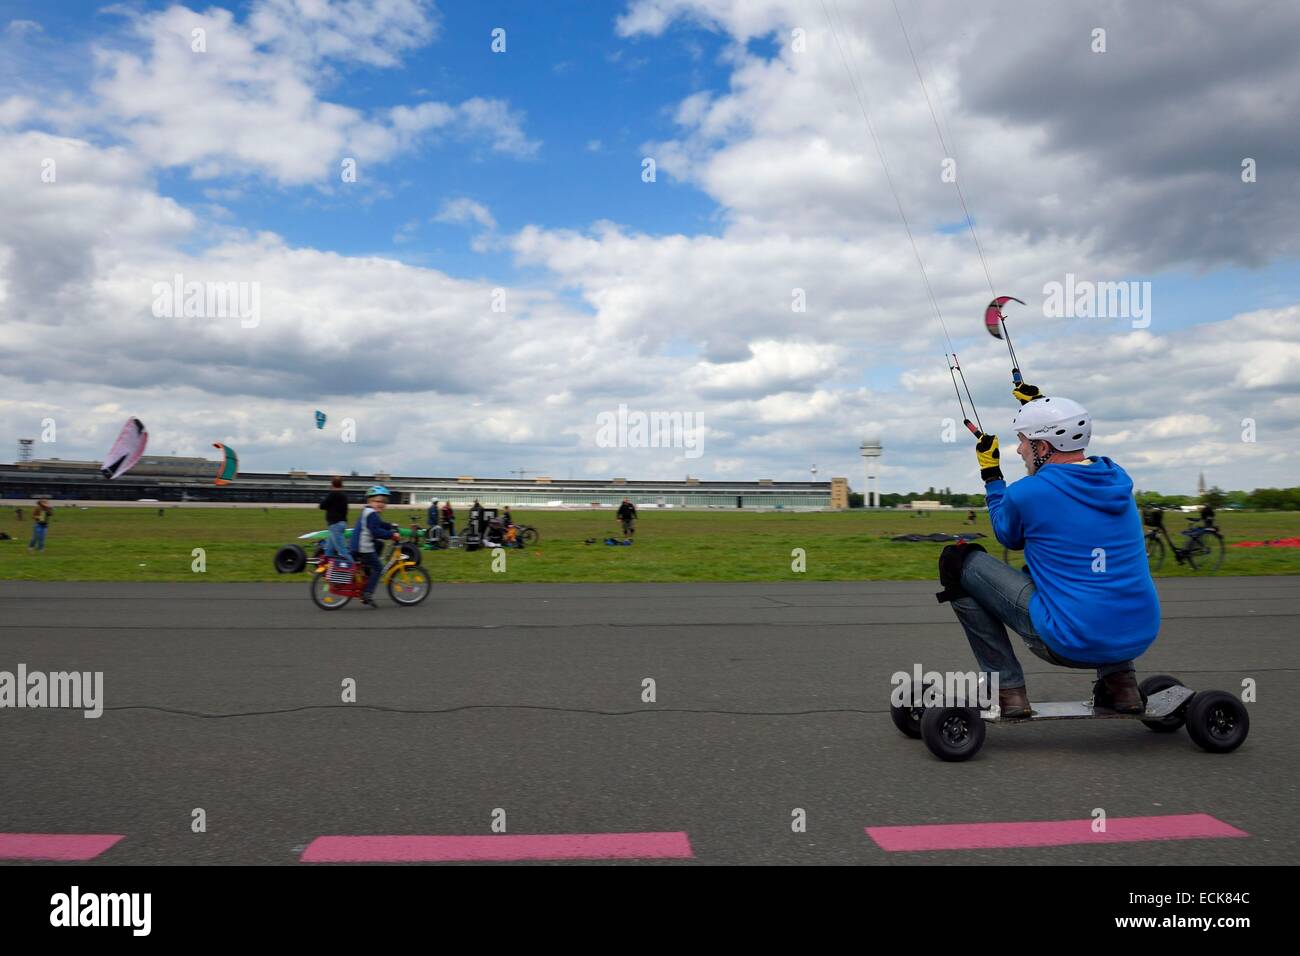 Germany, Berlin, former Berlin-Tempelhof international airport converted into a huge park, a meeting place for kite surfers, kite boarders and Country Buggy kiter Stock Photo